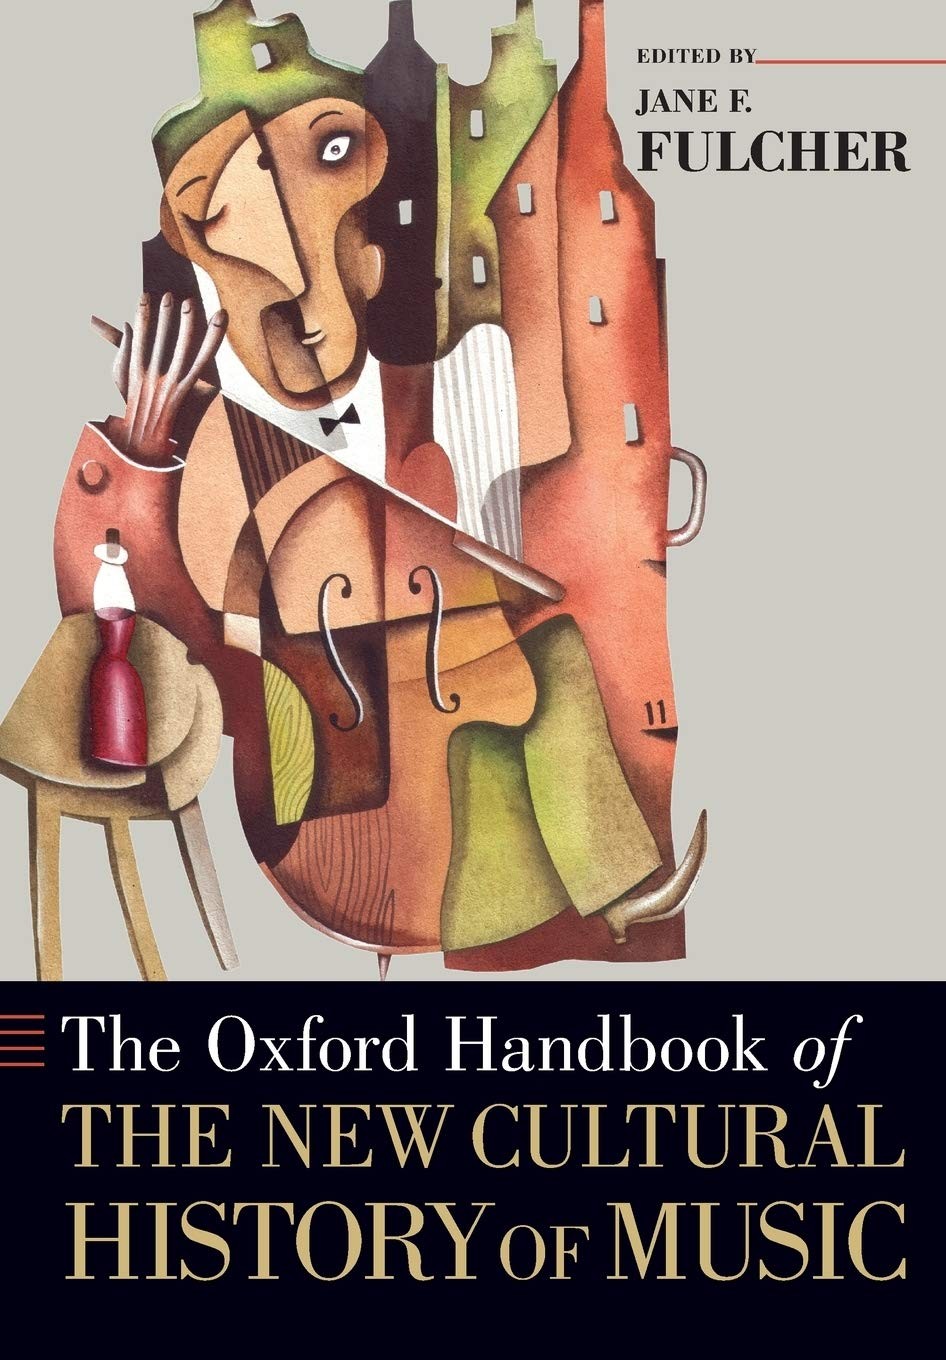 The Oxford Handbook of the New Cultural History of Music